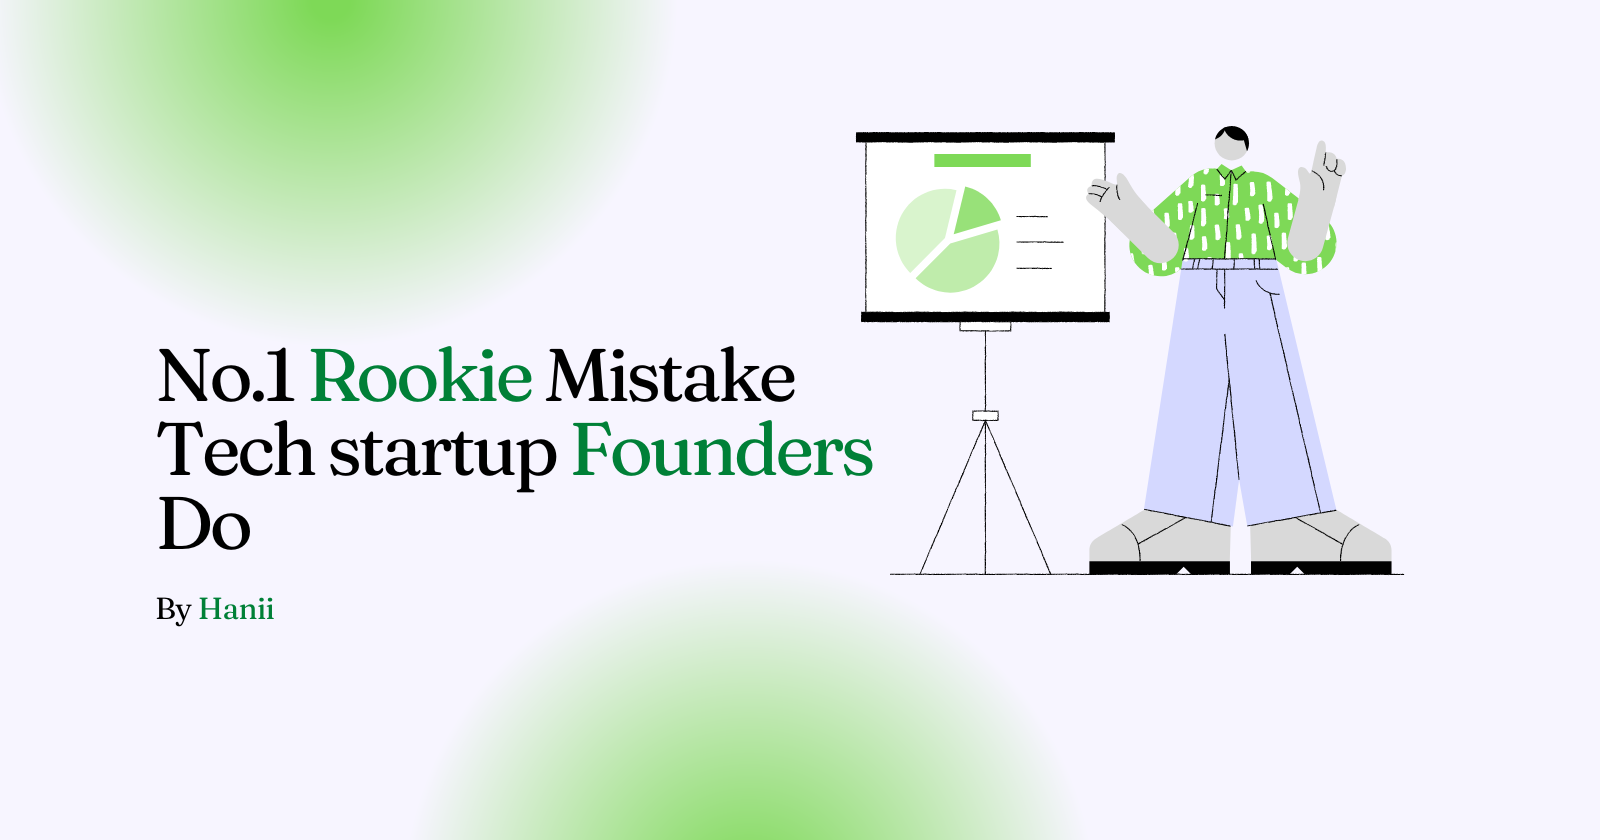 No.1 Rookie Mistake Tech startup Founders Do